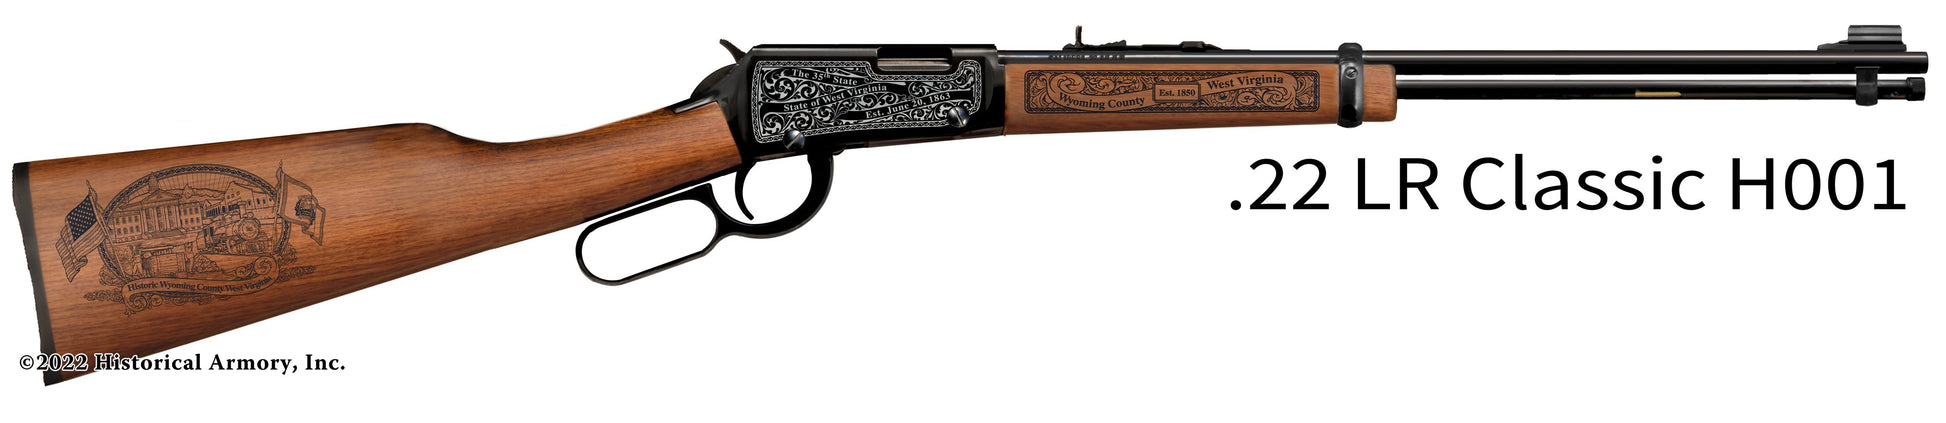 Wyoming County West Virginia Engraved Henry H001 Rifle